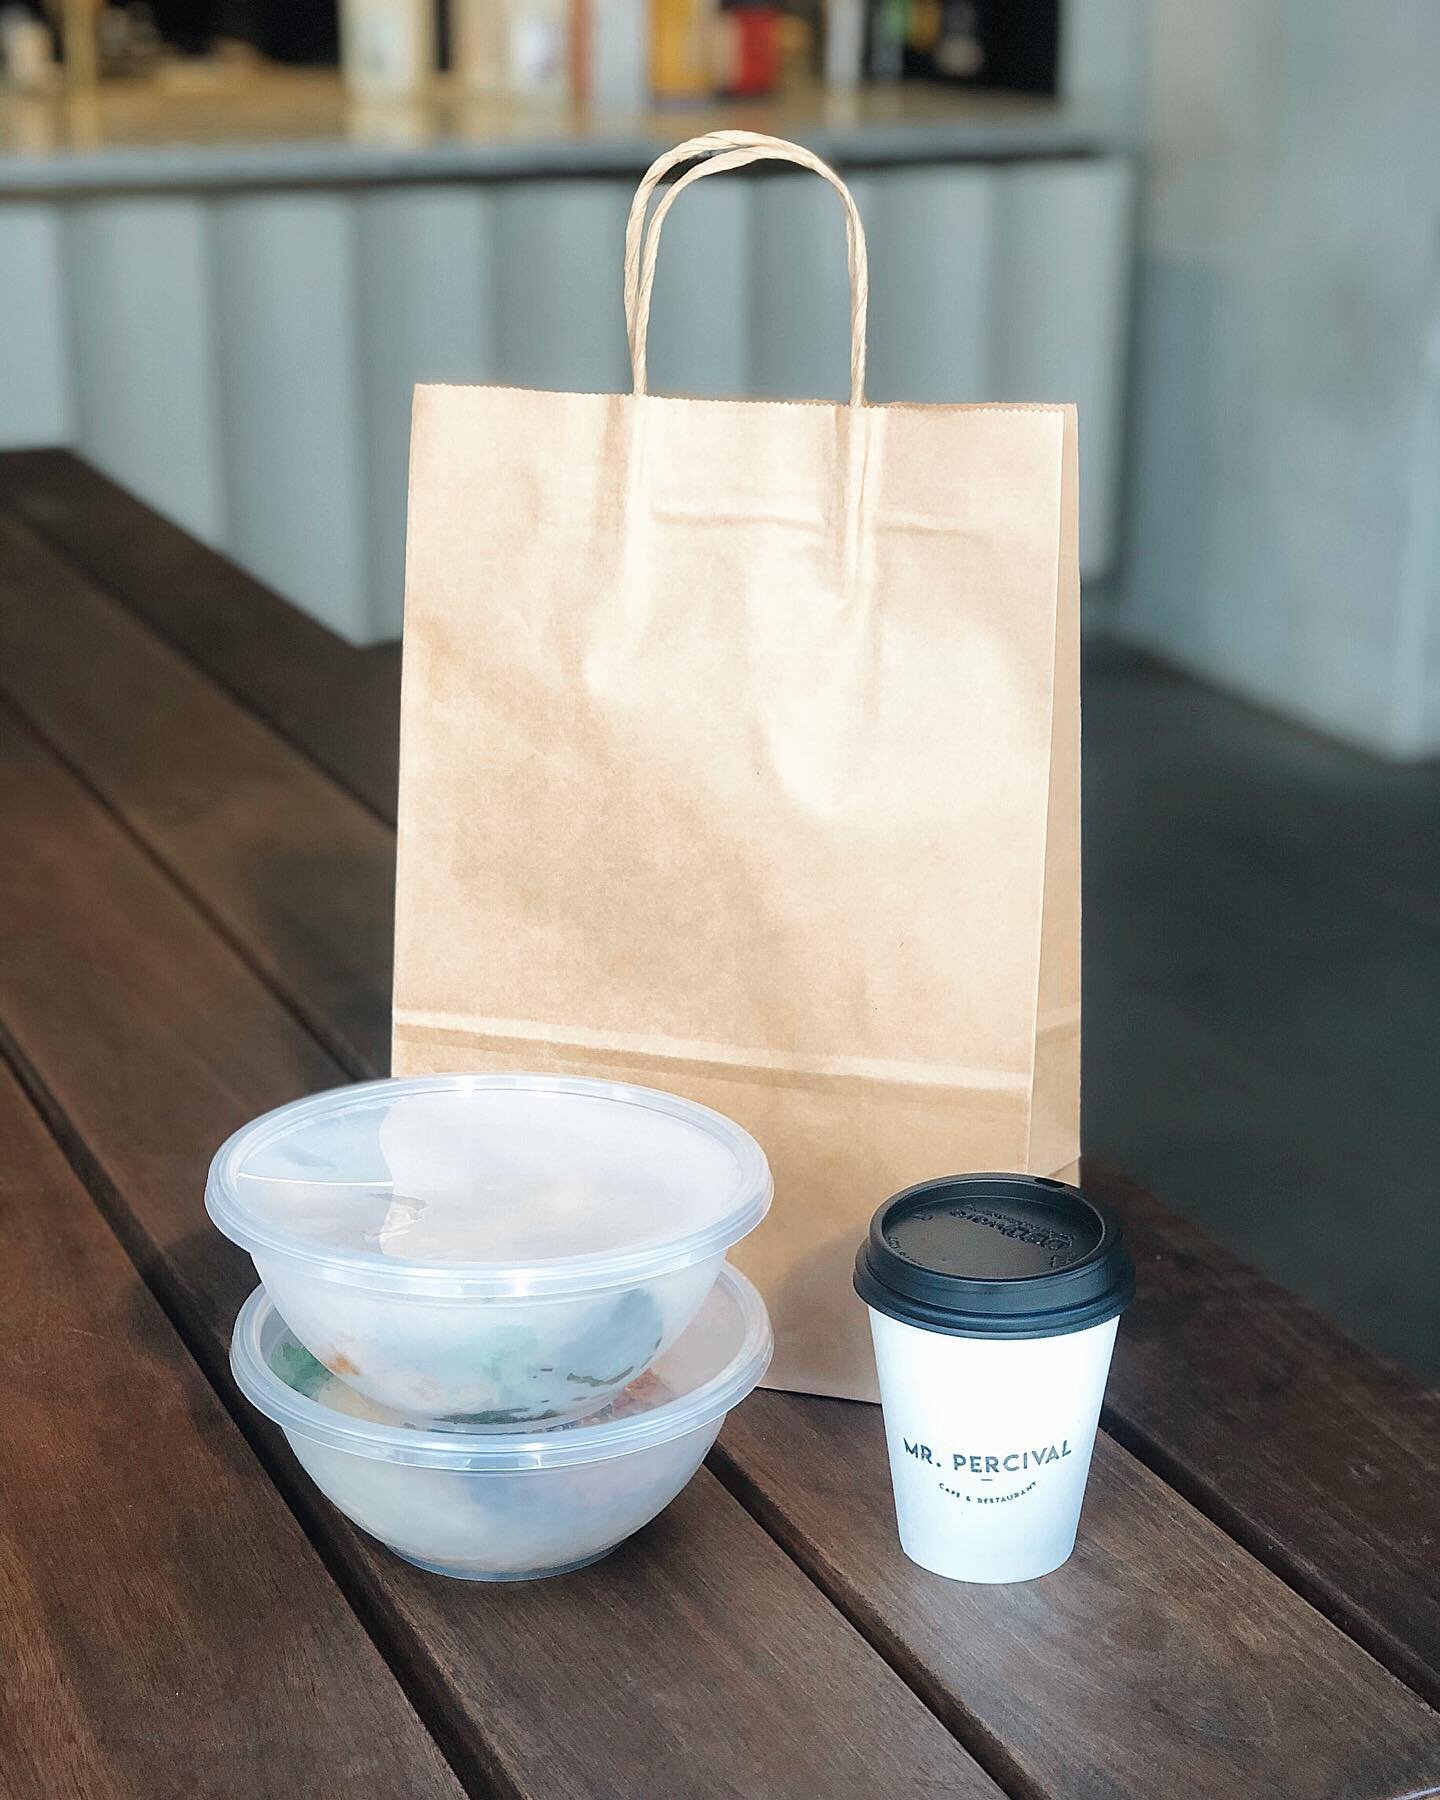 Make sure to check out our stories for new weekly takeaway specials ✨ We&rsquo;re still open from 7am to 3pm weekdays and 7am to 2pm on weekends! #mrpercivalcafe #albertparklake #supportyourlocal